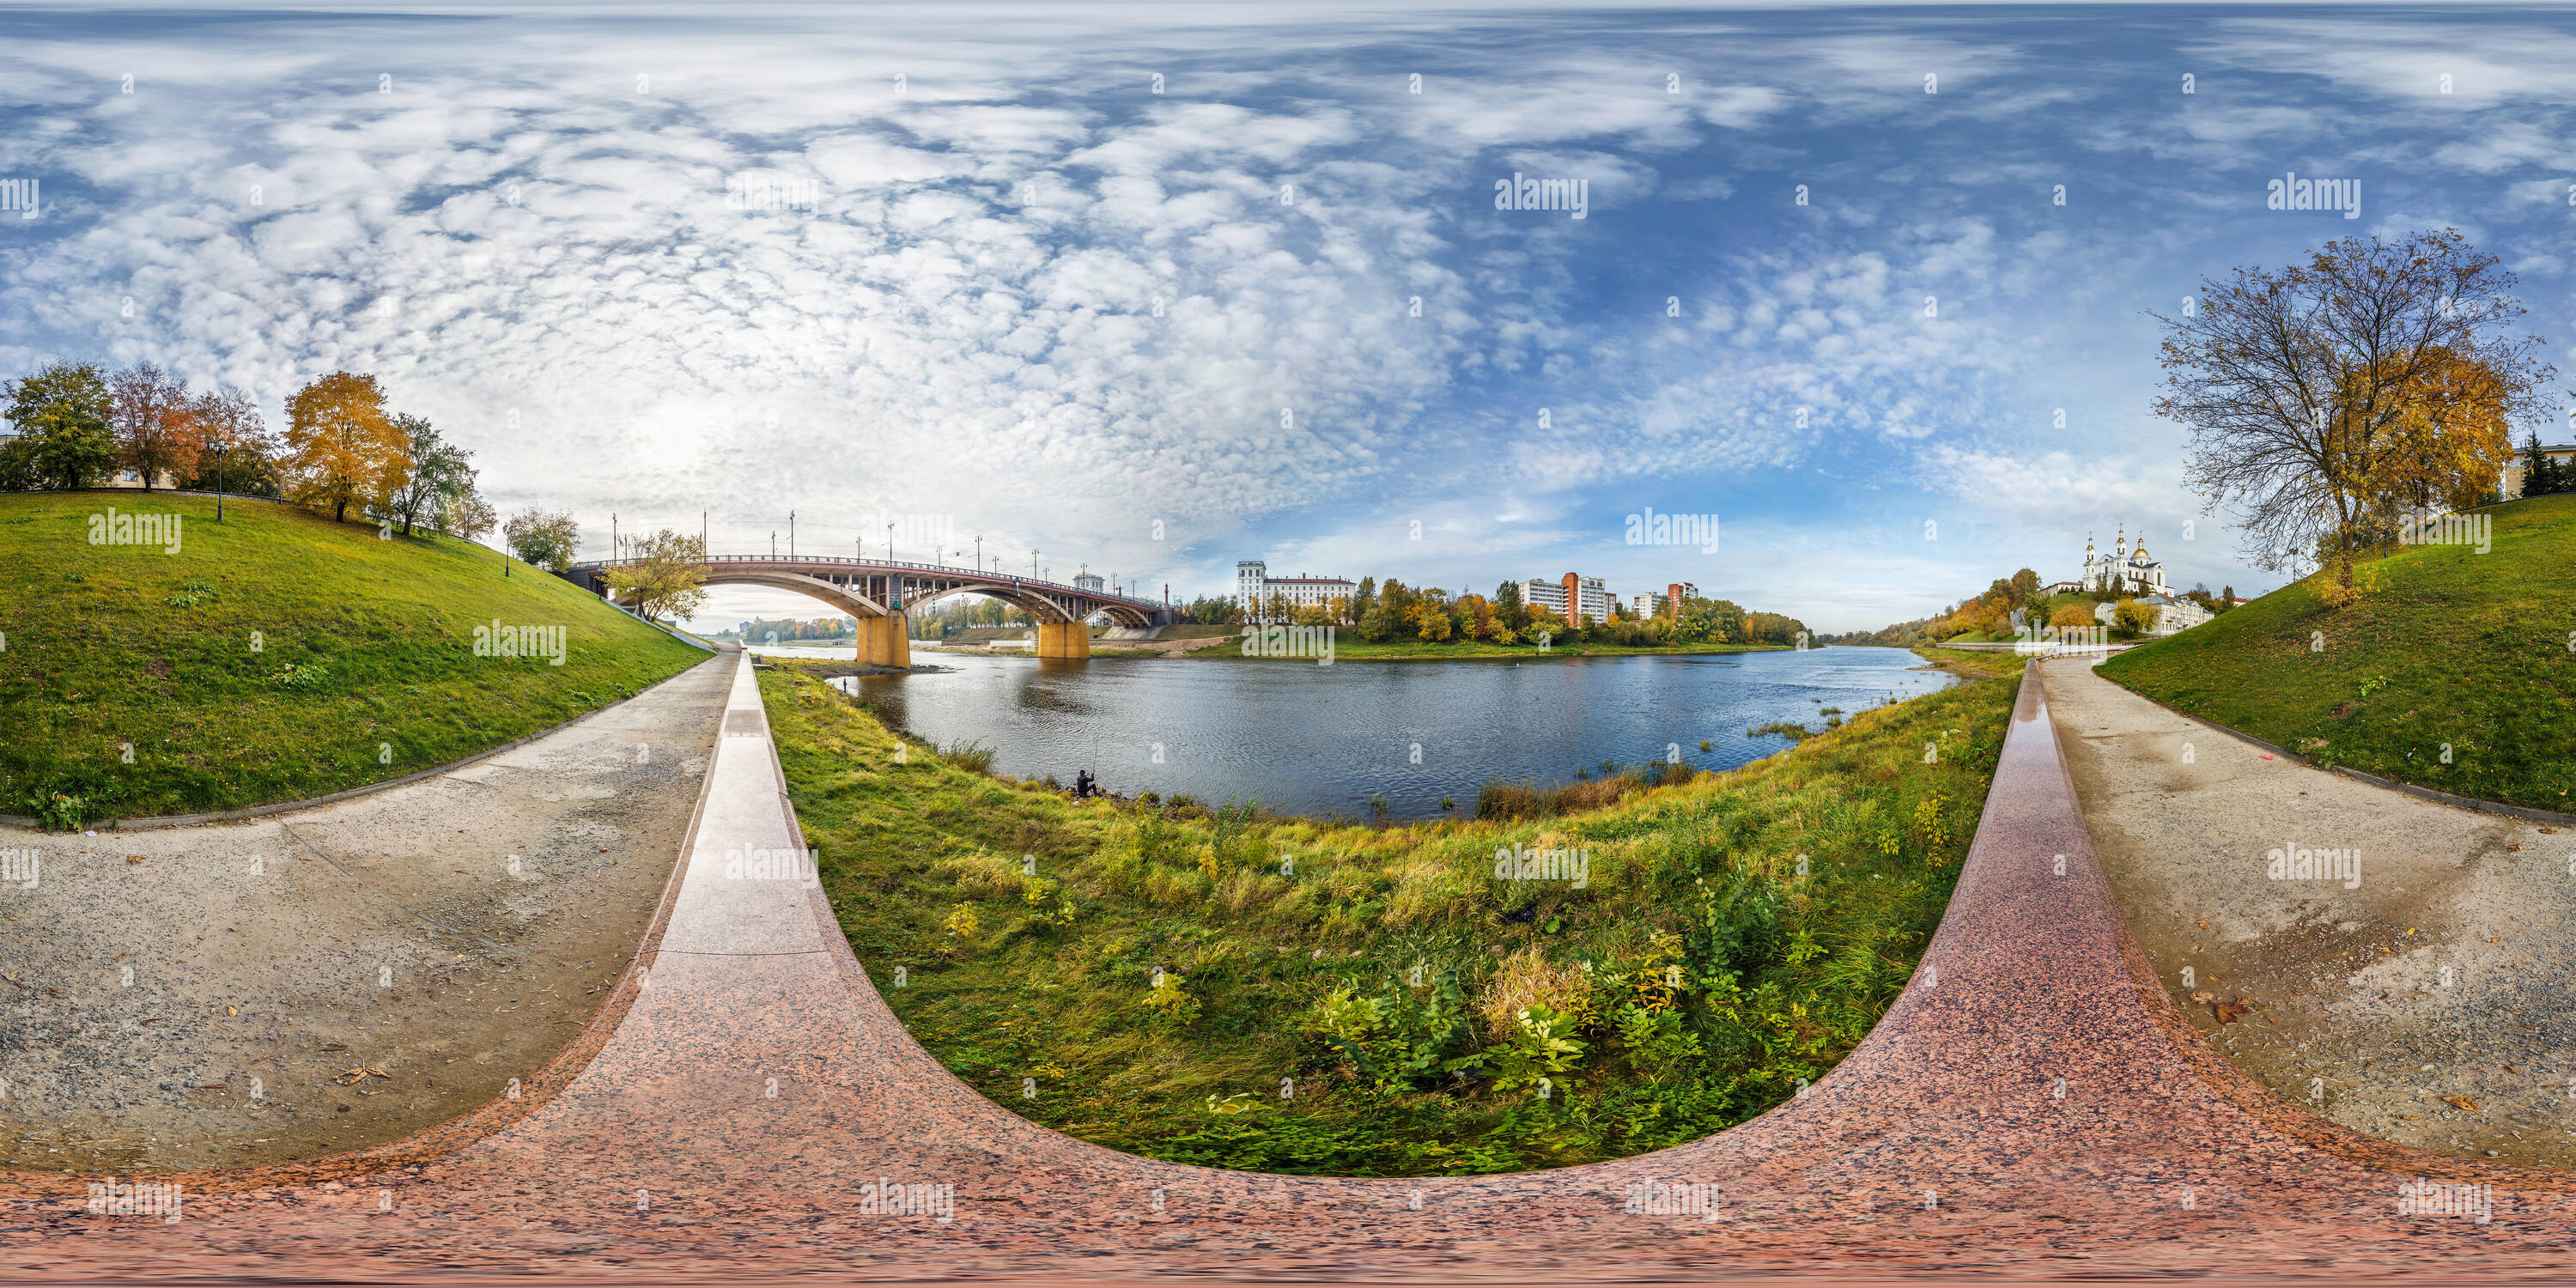 360-view-of-full-seamless-spherical-panorama-360-degrees-angle-view-on